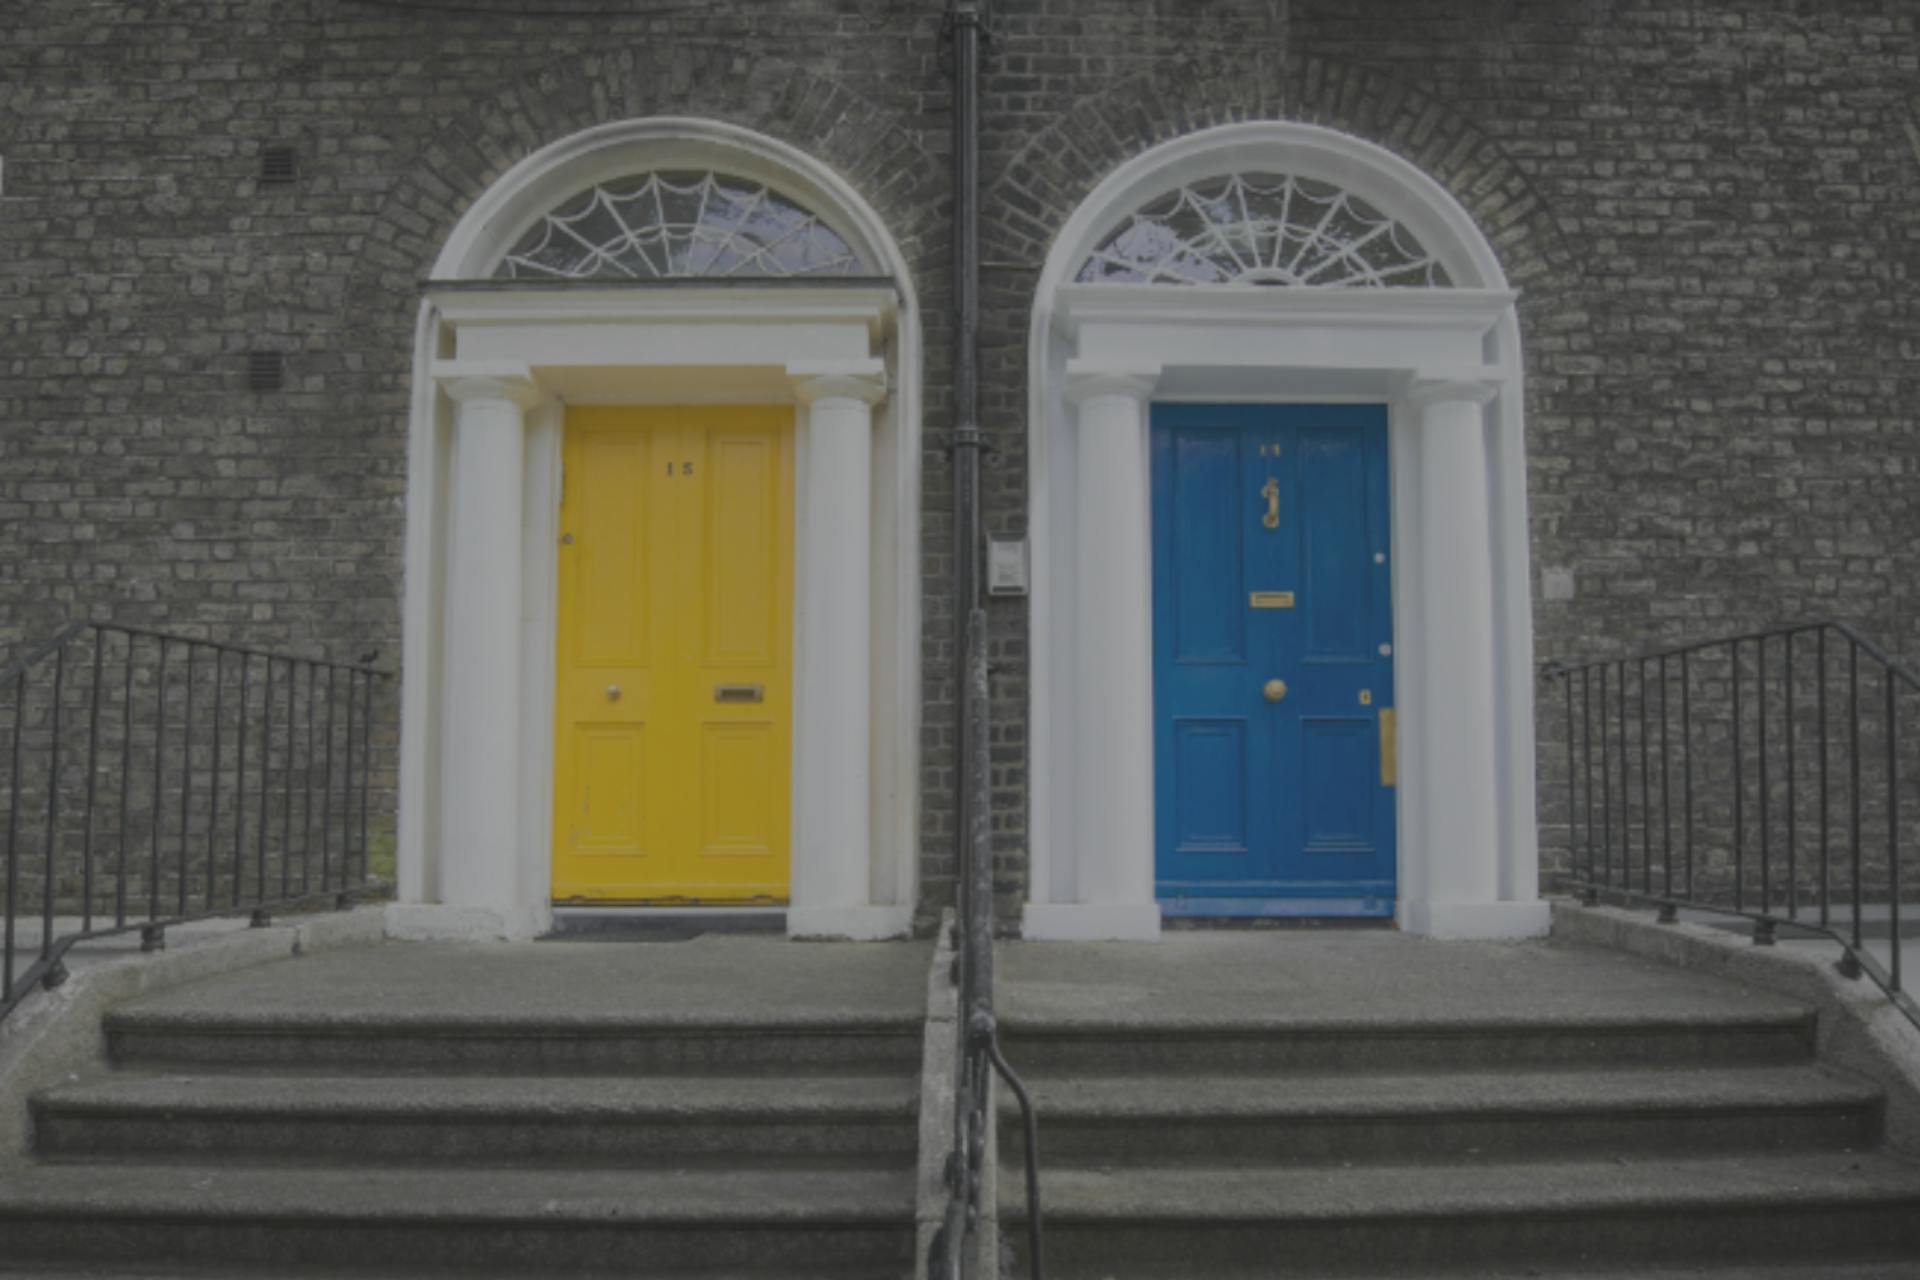 Two doors with grey steps leading up to them. One door is yellow, the other is blue.